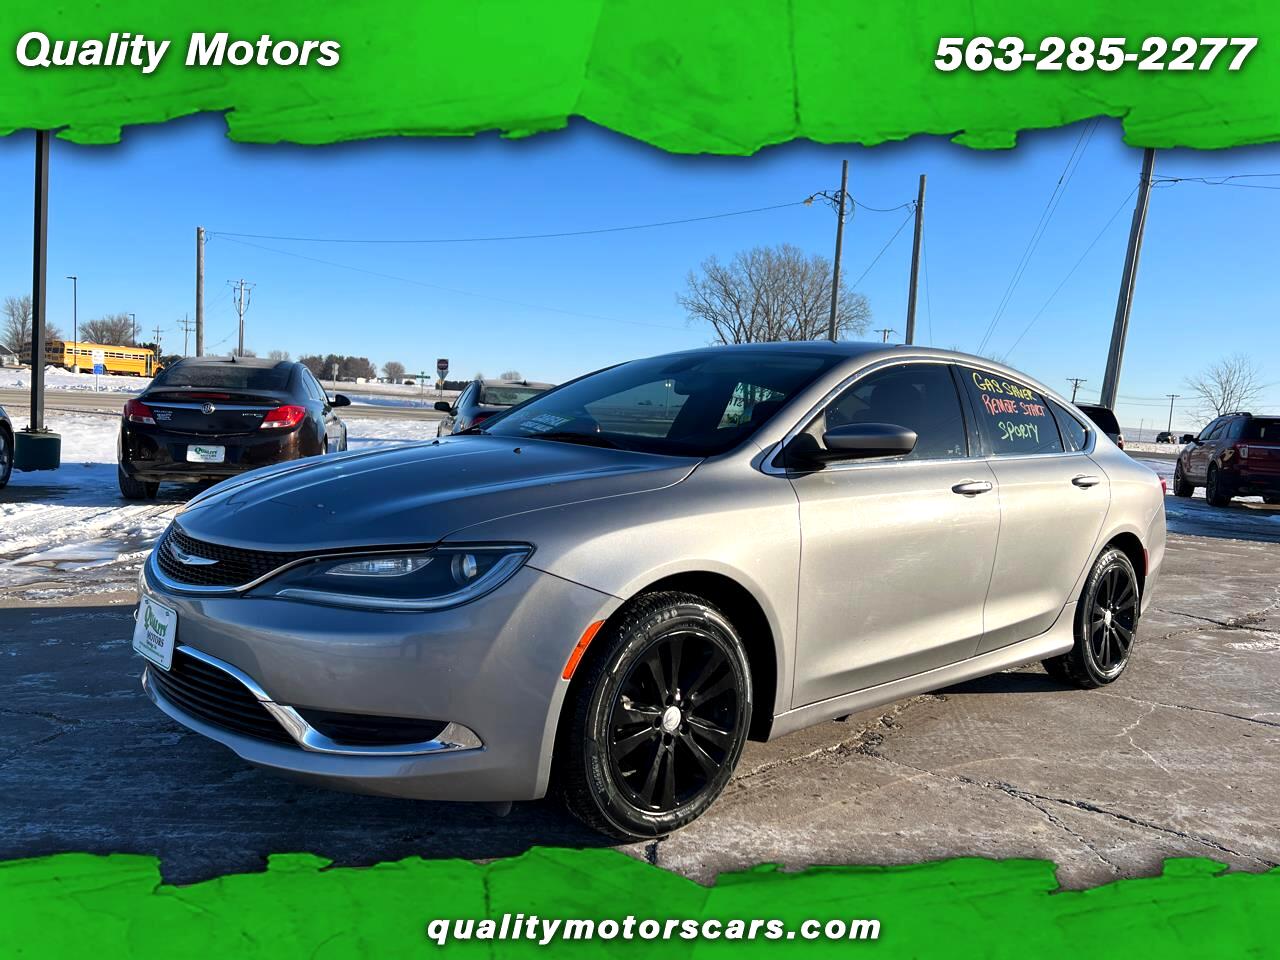 Used 2015 Chrysler 200 4dr Sdn Limited FWD for Sale in Eldridge IA 52748  Quality Motors